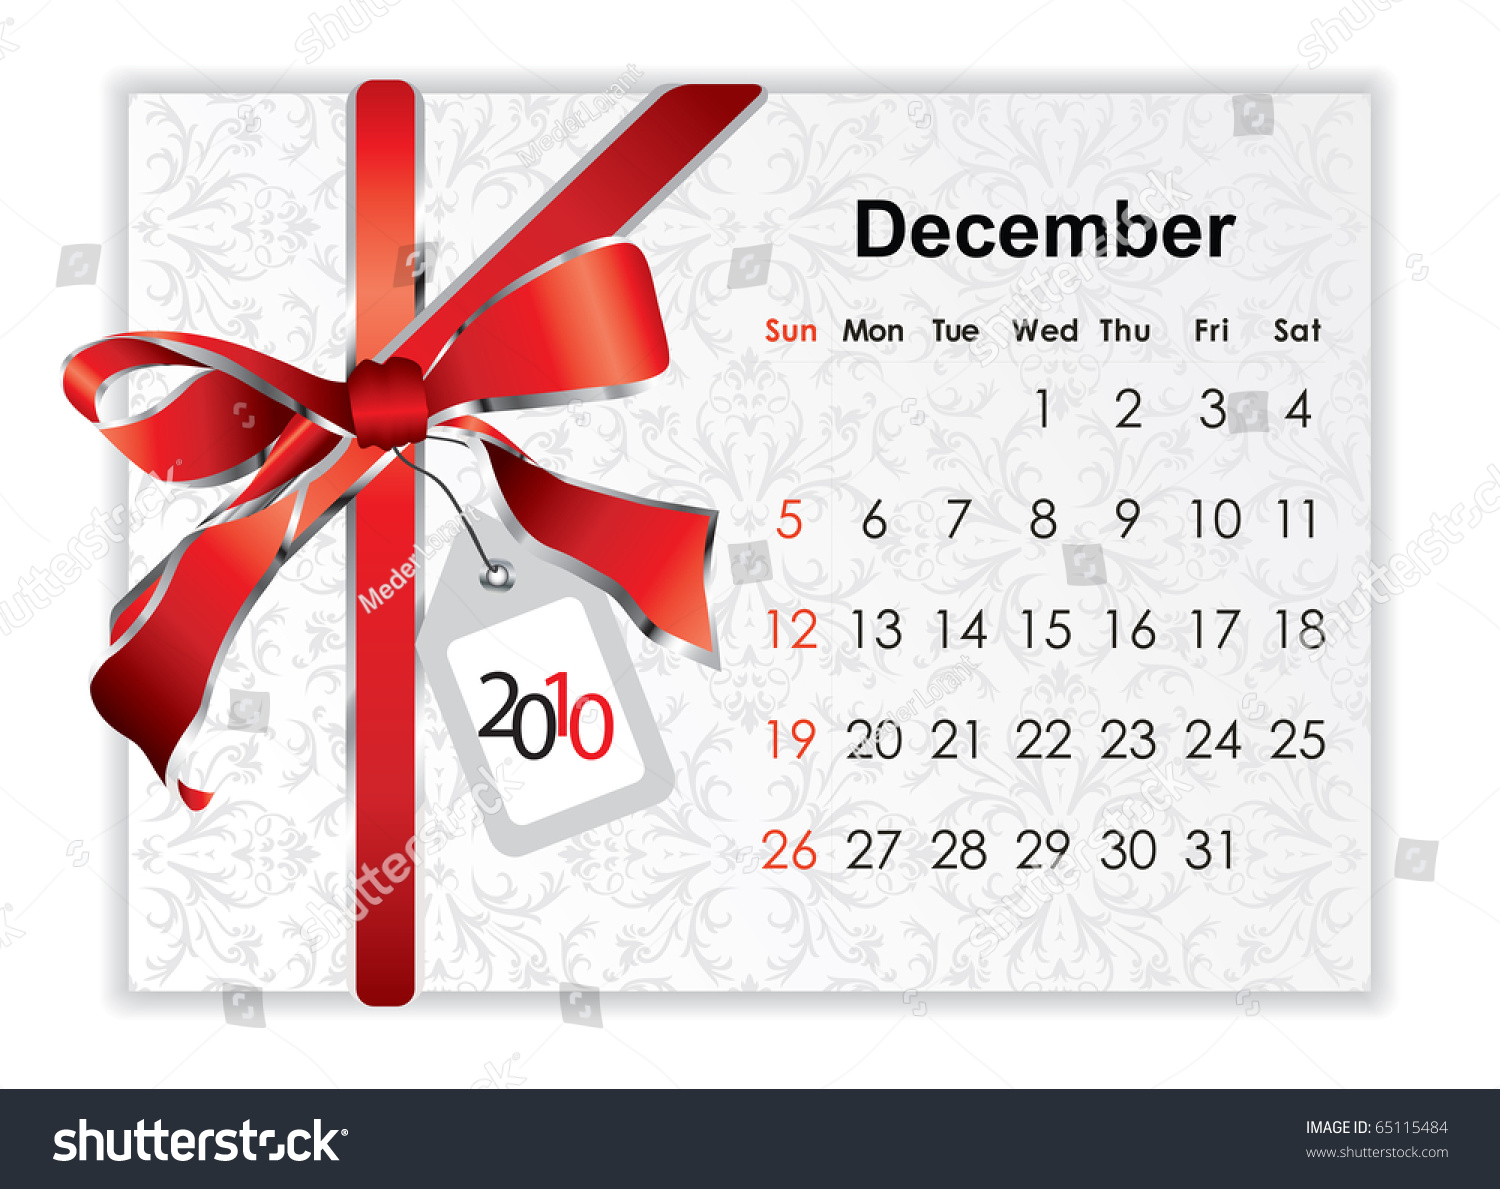 2010 December Holiday Calendar With Christmas Decoration Stock Vector